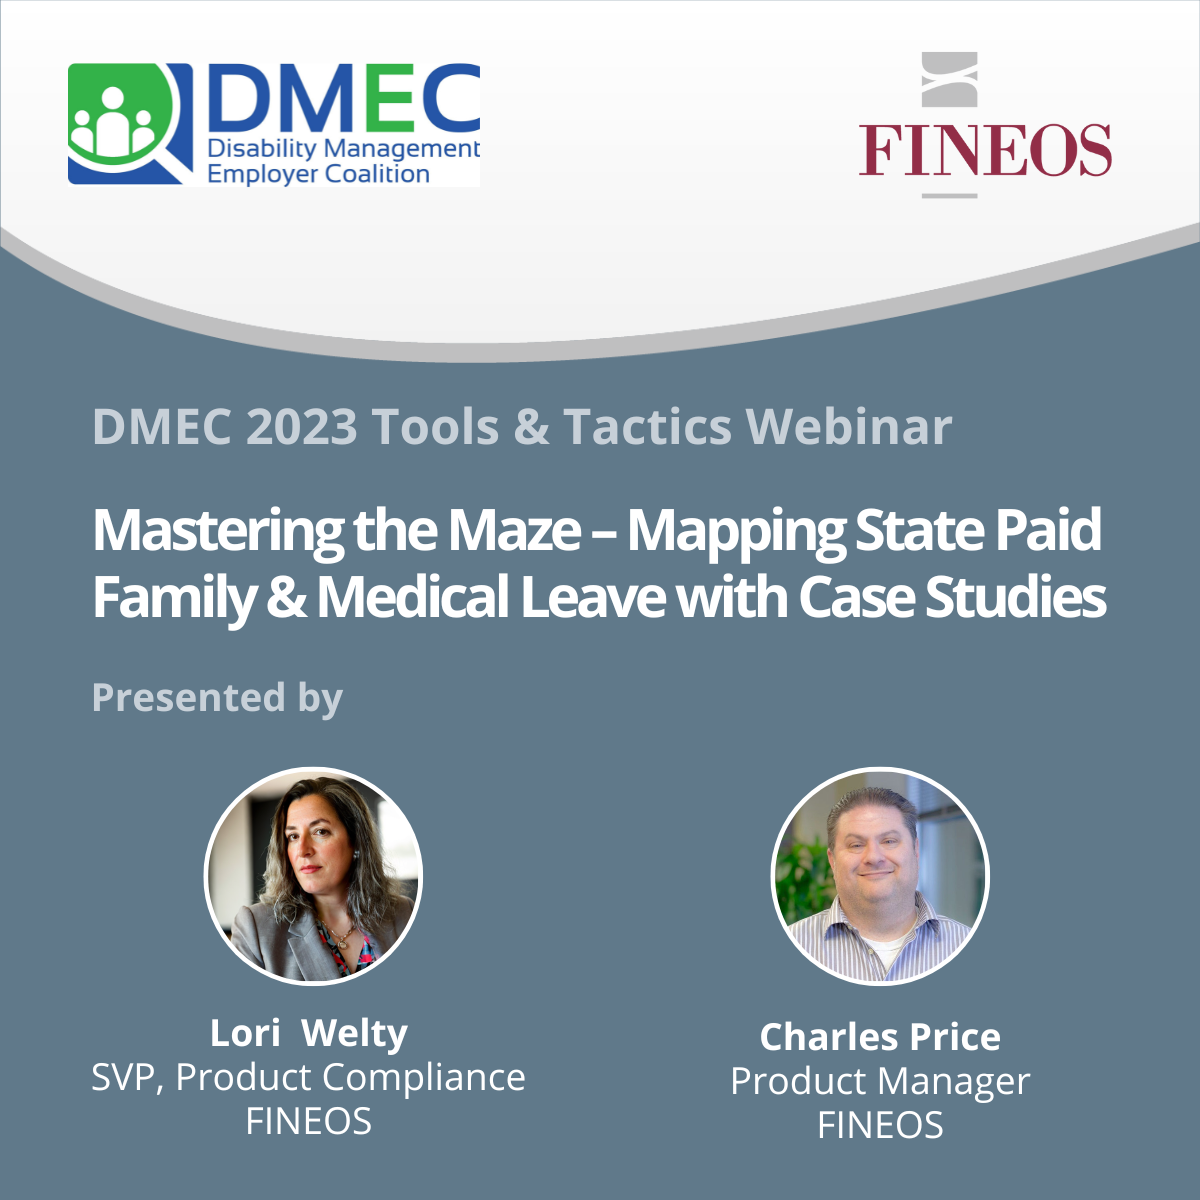 2023 Tools & Tactics Webinar: Mastering the Maze - Mapping State Paid Family & Medical Leave with Case Studies